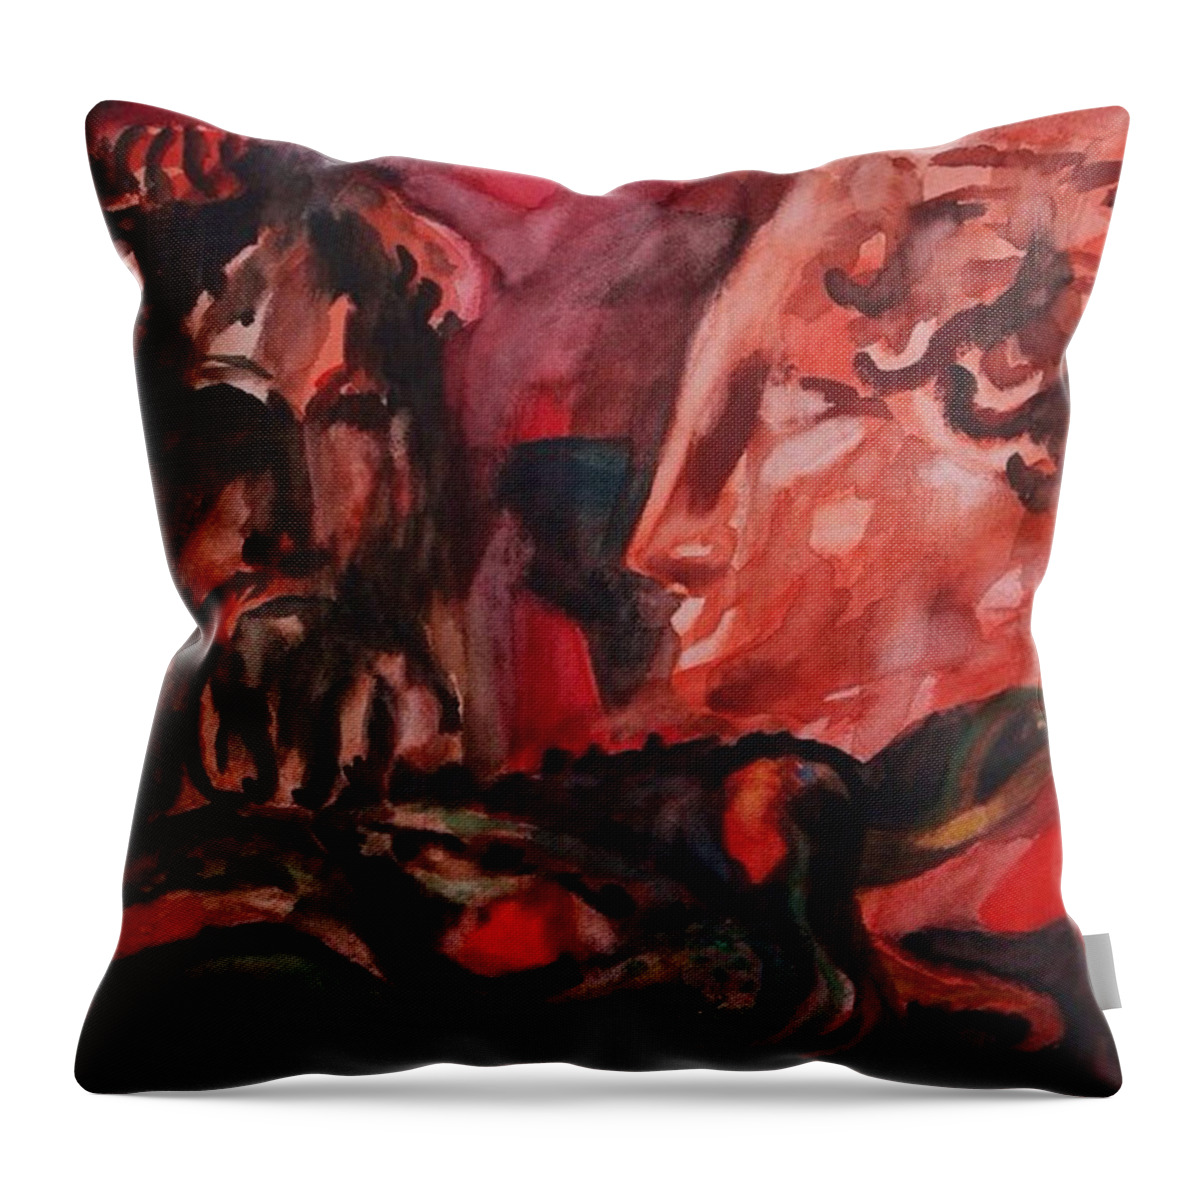 Ancient Greece Throw Pillow featuring the painting Dialogo Silenzioso by Enrico Garff